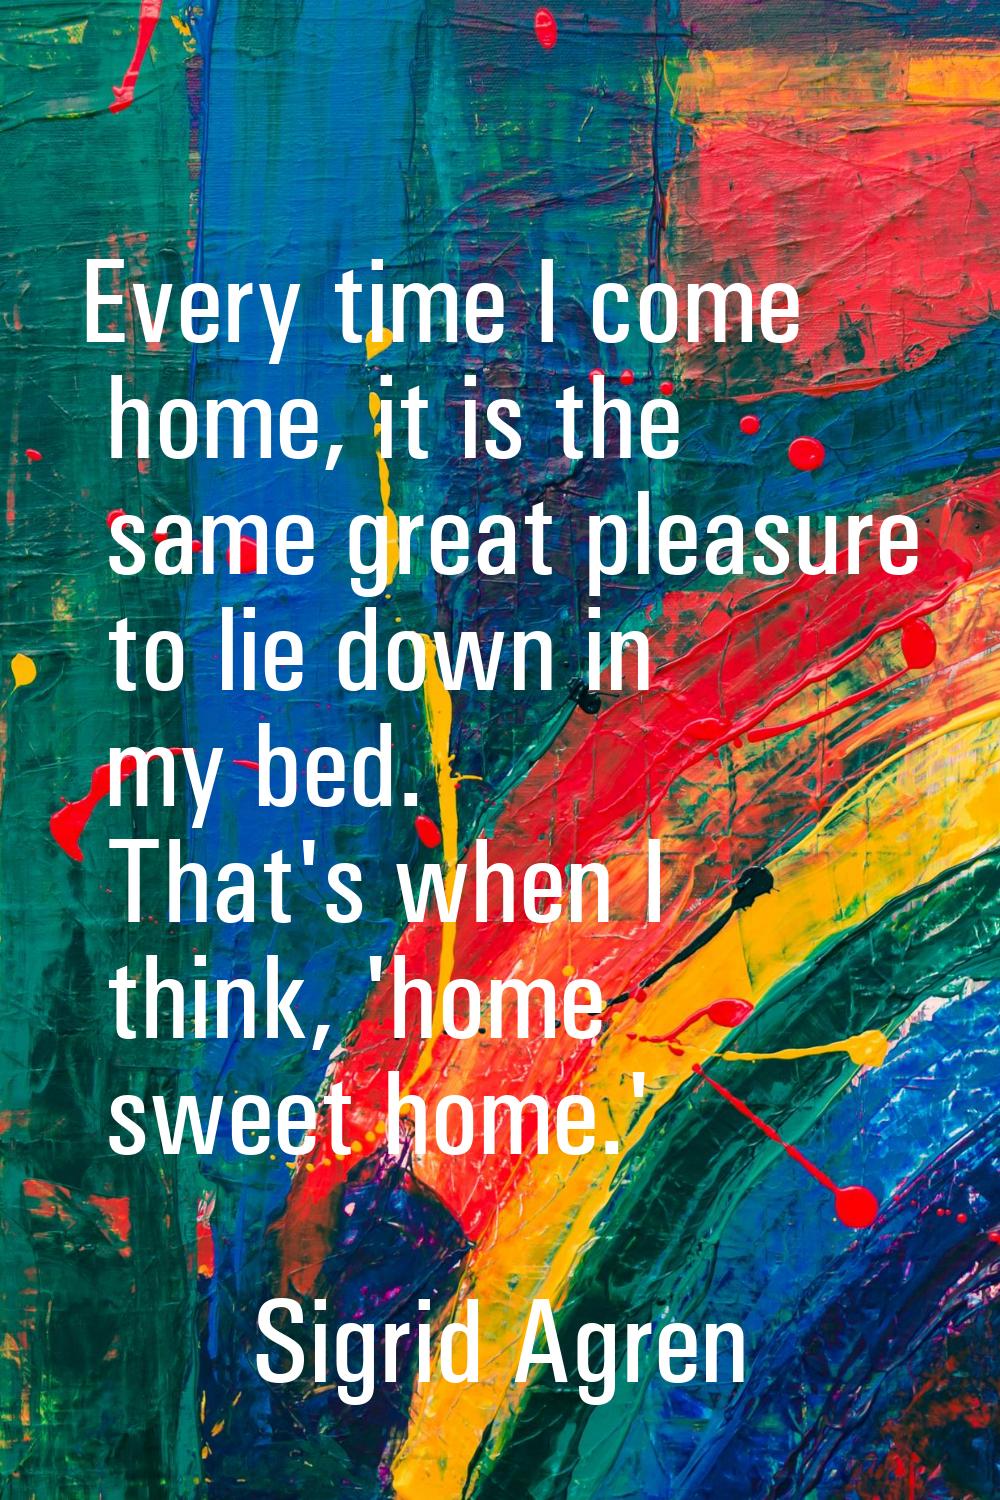 Every time I come home, it is the same great pleasure to lie down in my bed. That's when I think, '